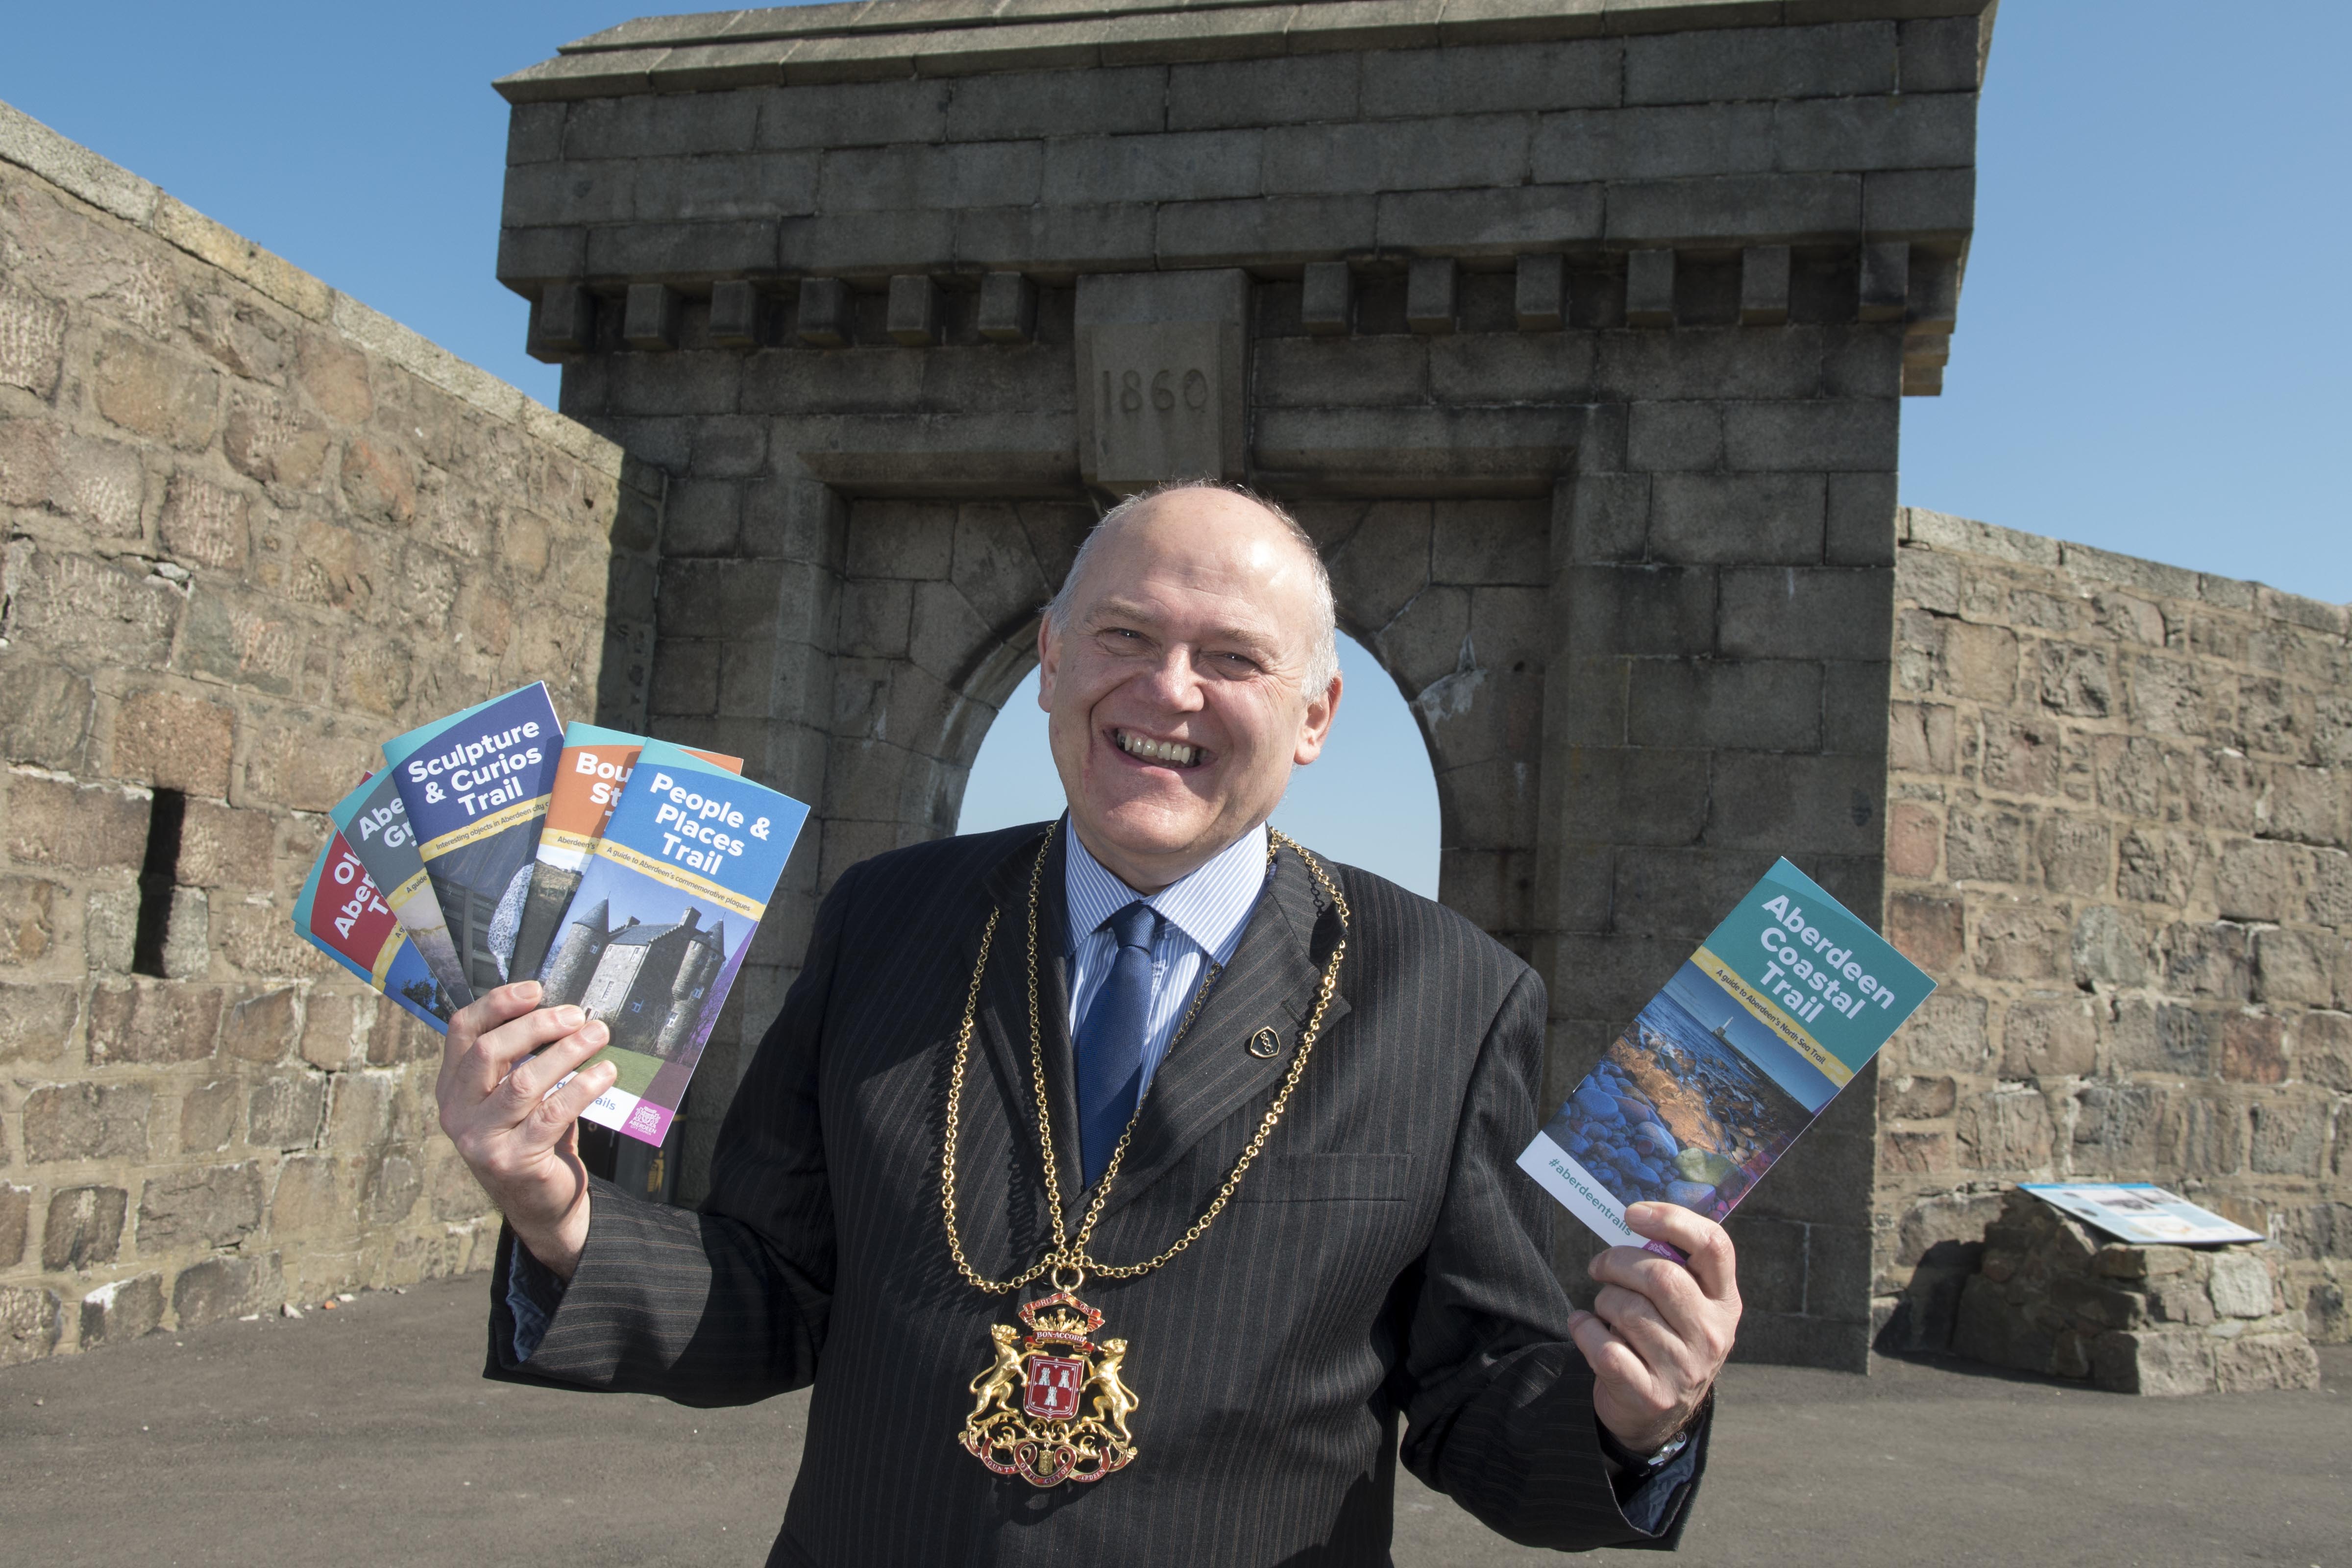 The Lord Provost Barney Crockett launched the new series of Aberdeen Trail Books-